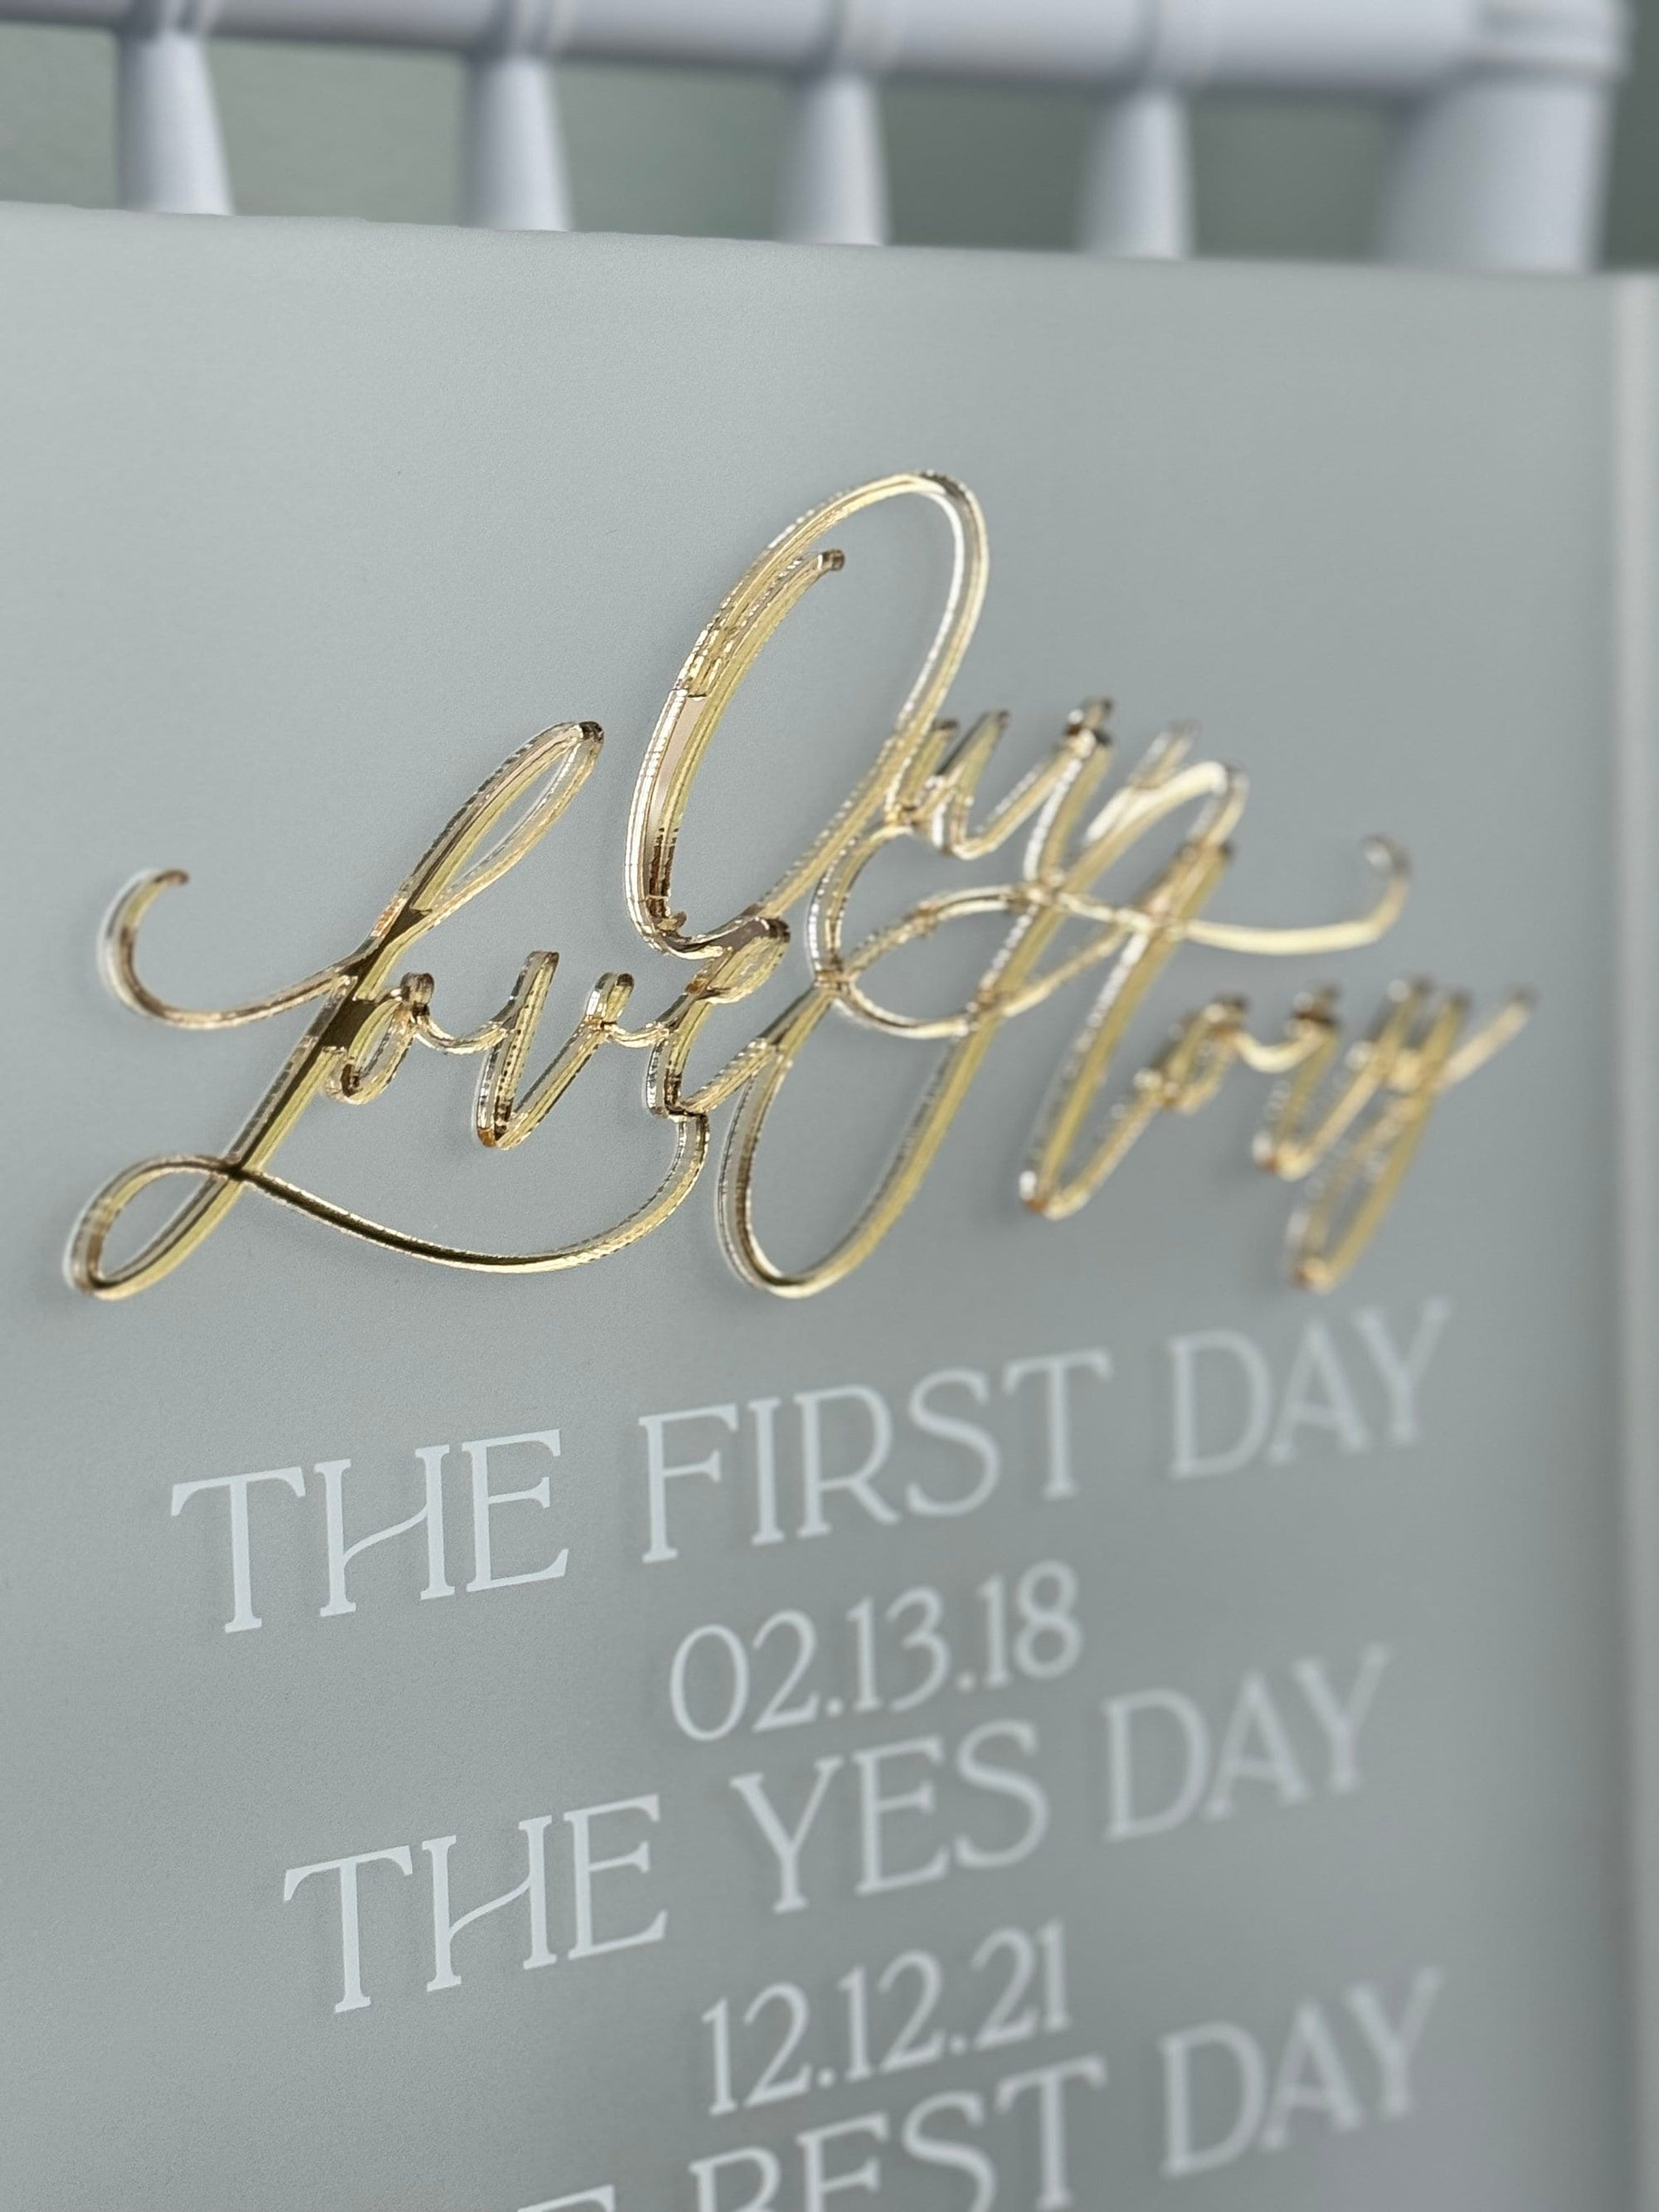 3D Gold Mirror Our Love Story First Day Yes Day Best Day Acrylic Wedding Sign, Sweetheart Table Lucite Table Sign, Special Dates Anniversary